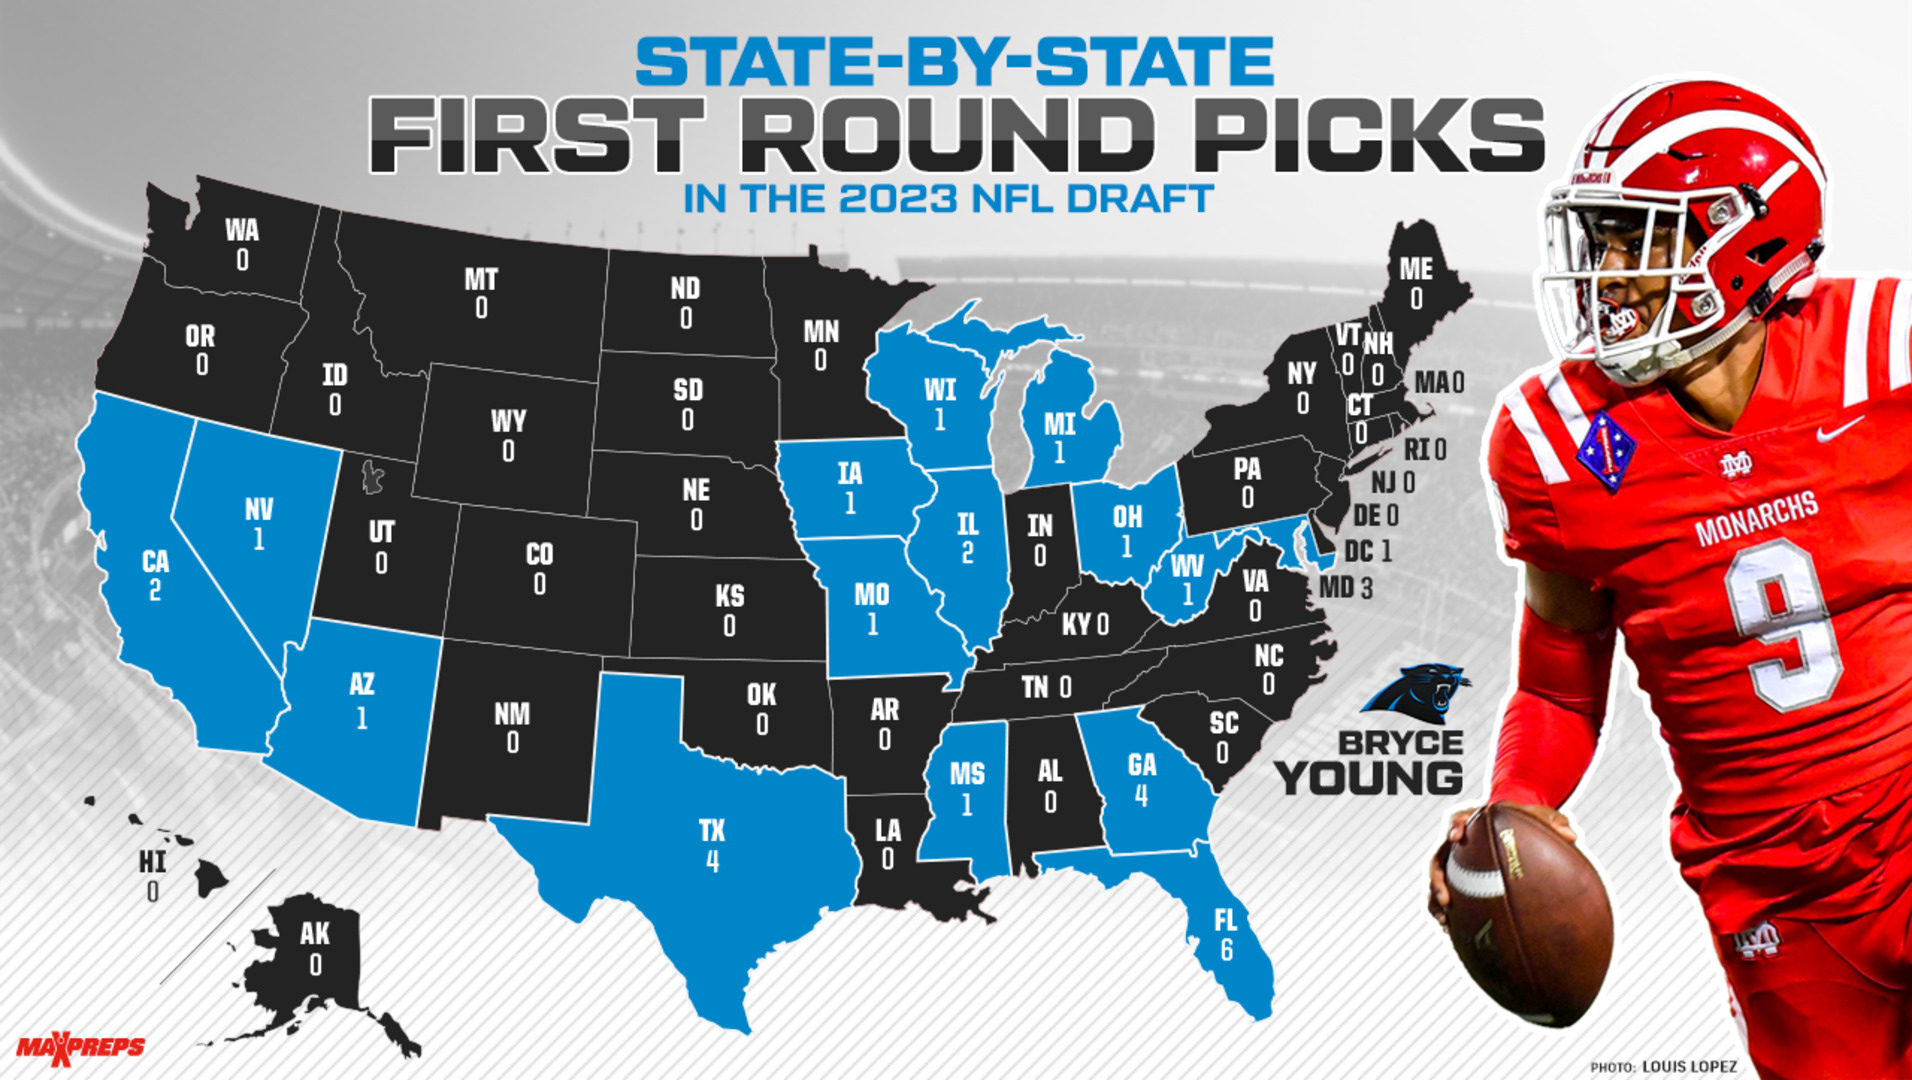 NFL - Who do you think will be the #1 pick in the 2023 NFL Draft? 